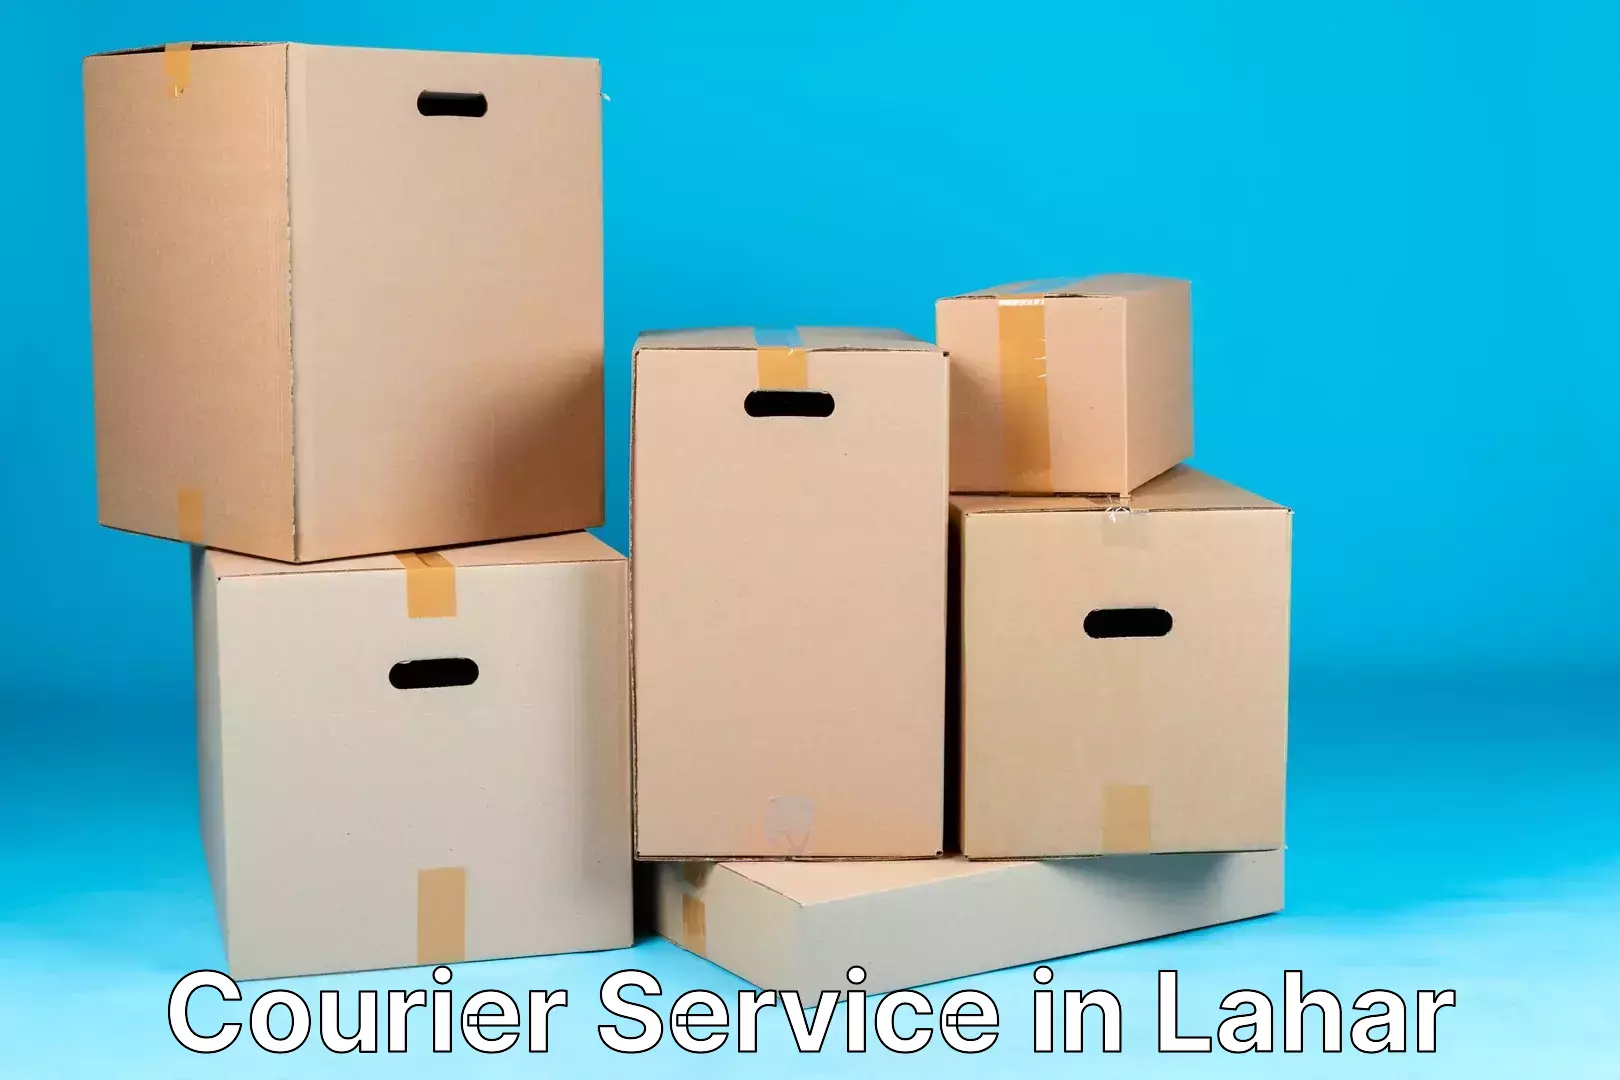 On-demand shipping options in Lahar